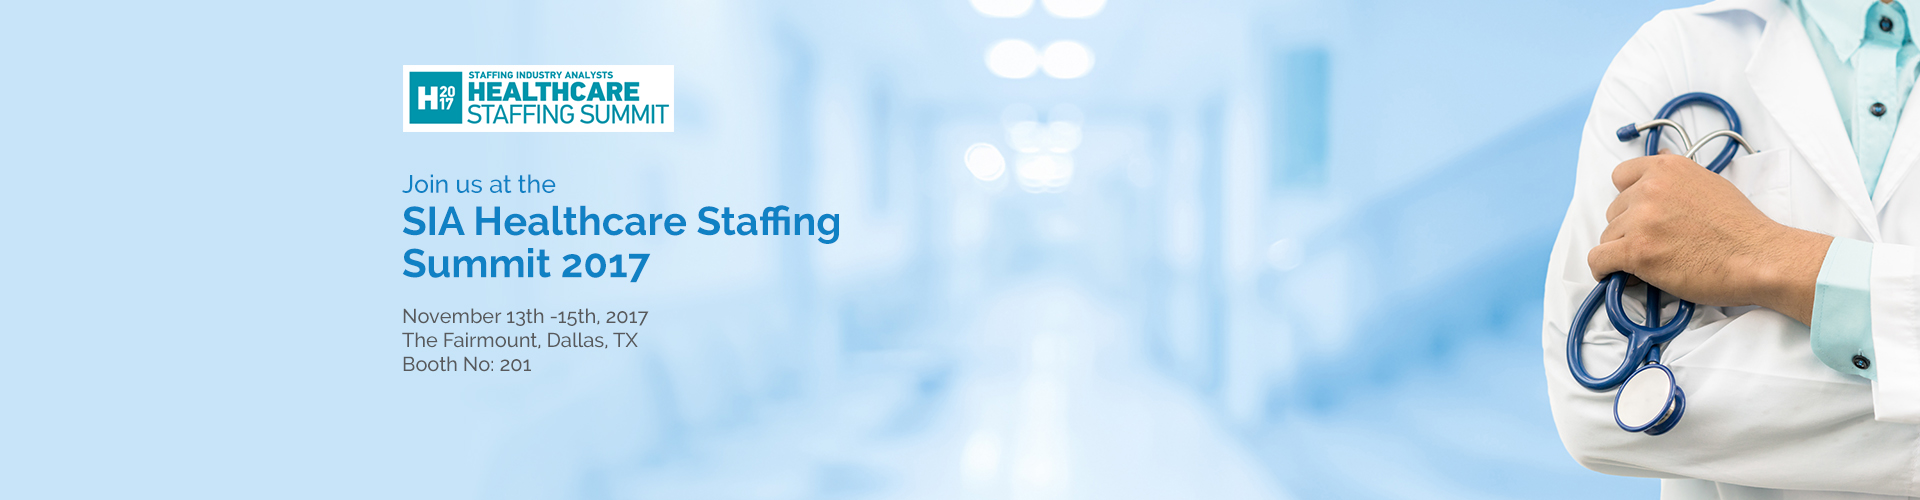 Meet IMS People Possible at SIA Healthcare Staffing Summit